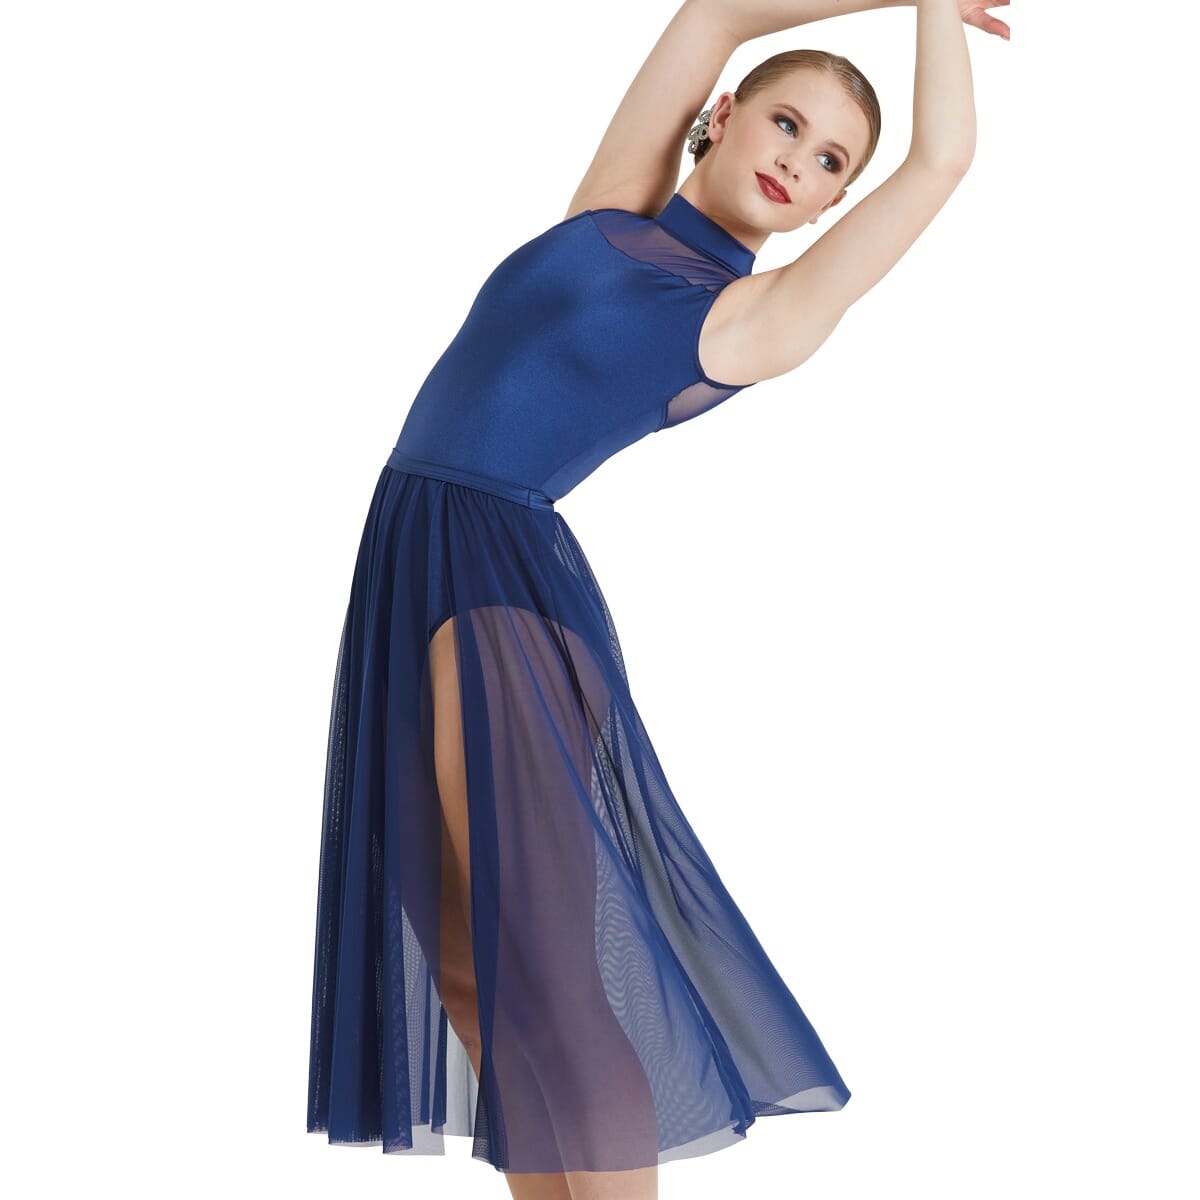 Hire Lagoon Lyrical Navy from Costume Source | Lyrical dance costume ...